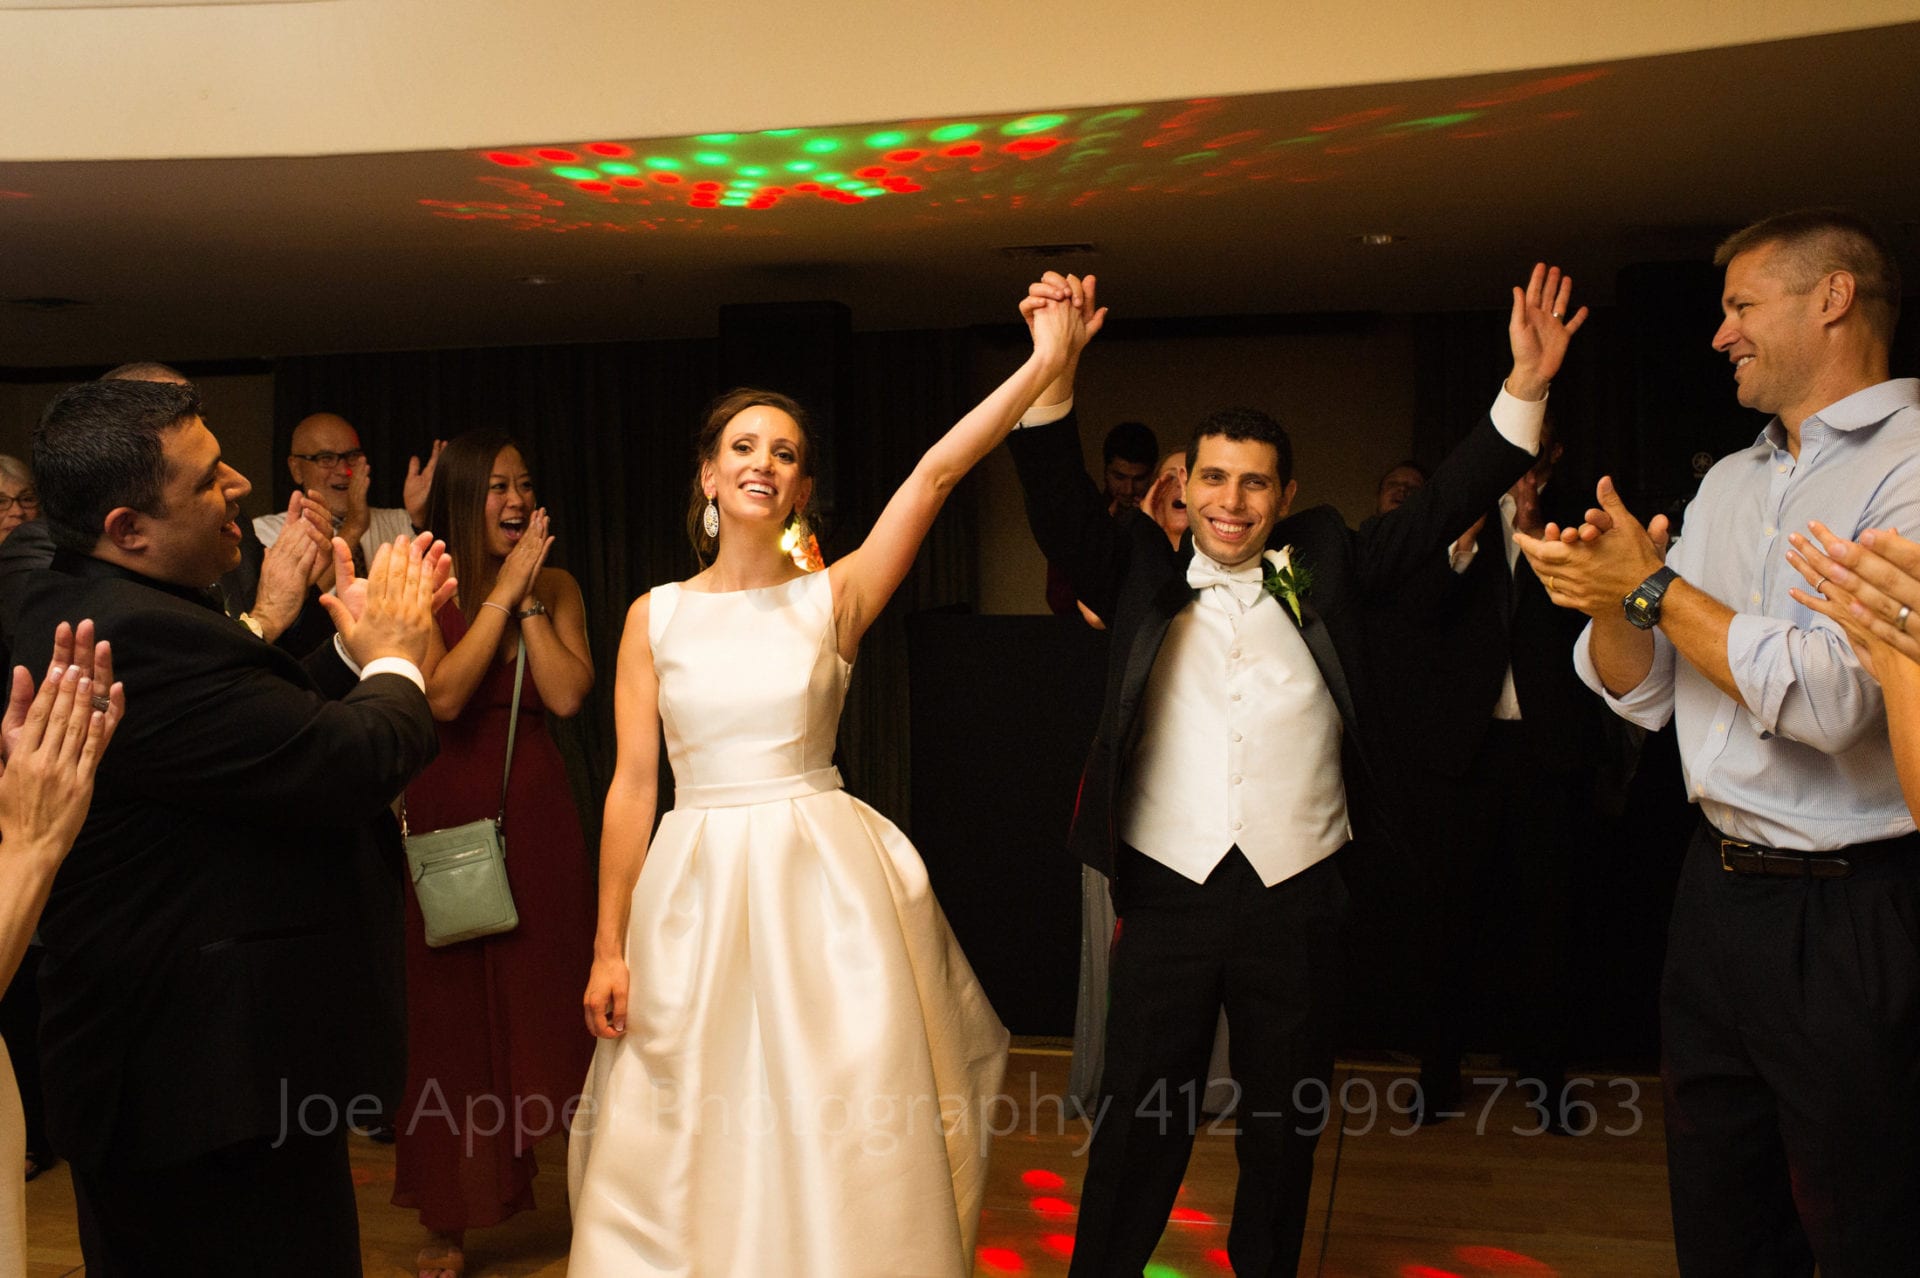 guests clap as a bride and groom enter the venue